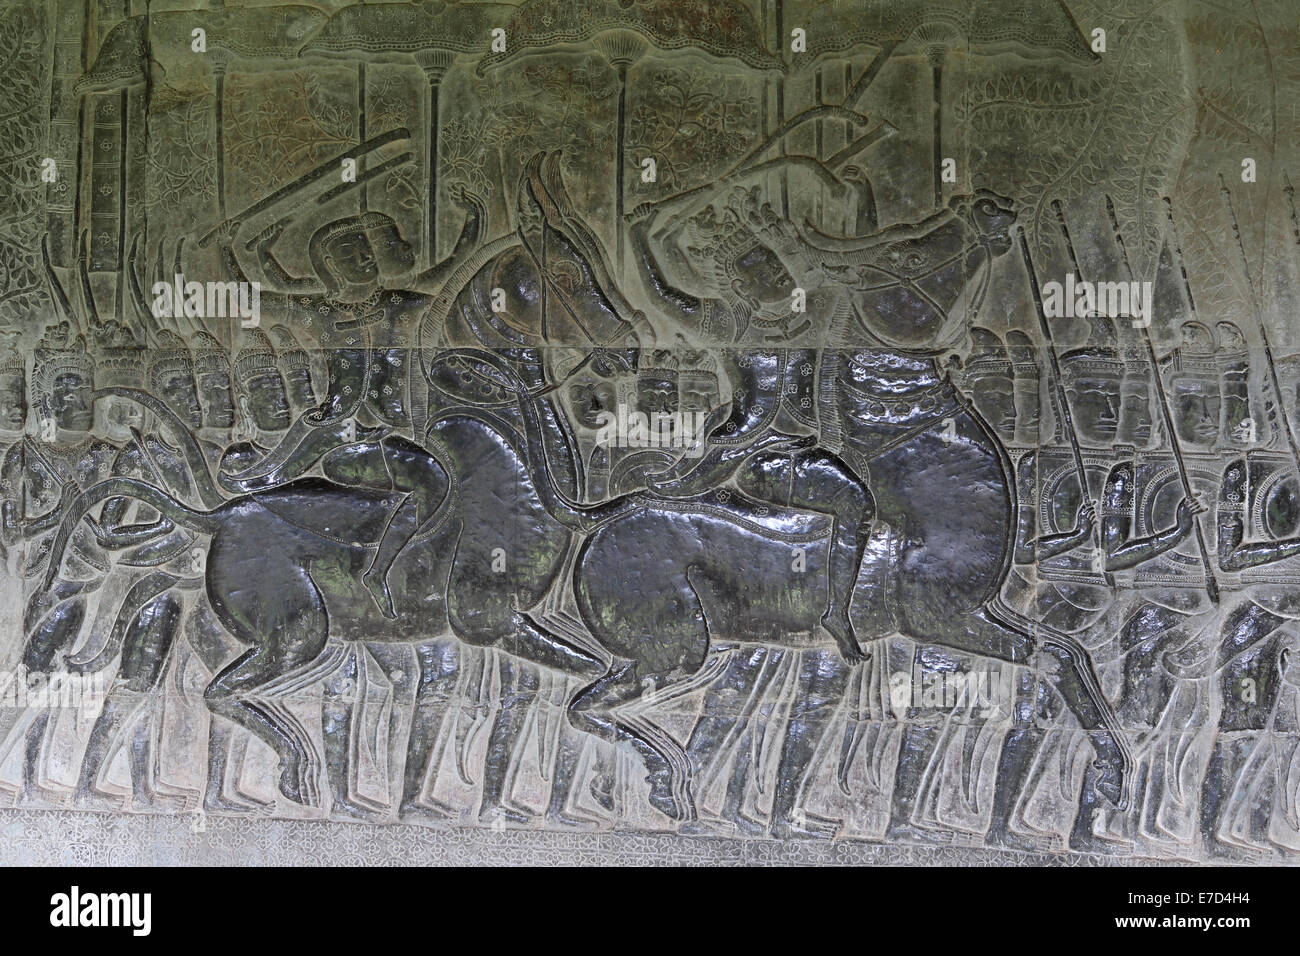 Bas Relief figures at Angkor Wat in Siem Reap, Cambodia. Stock Photo